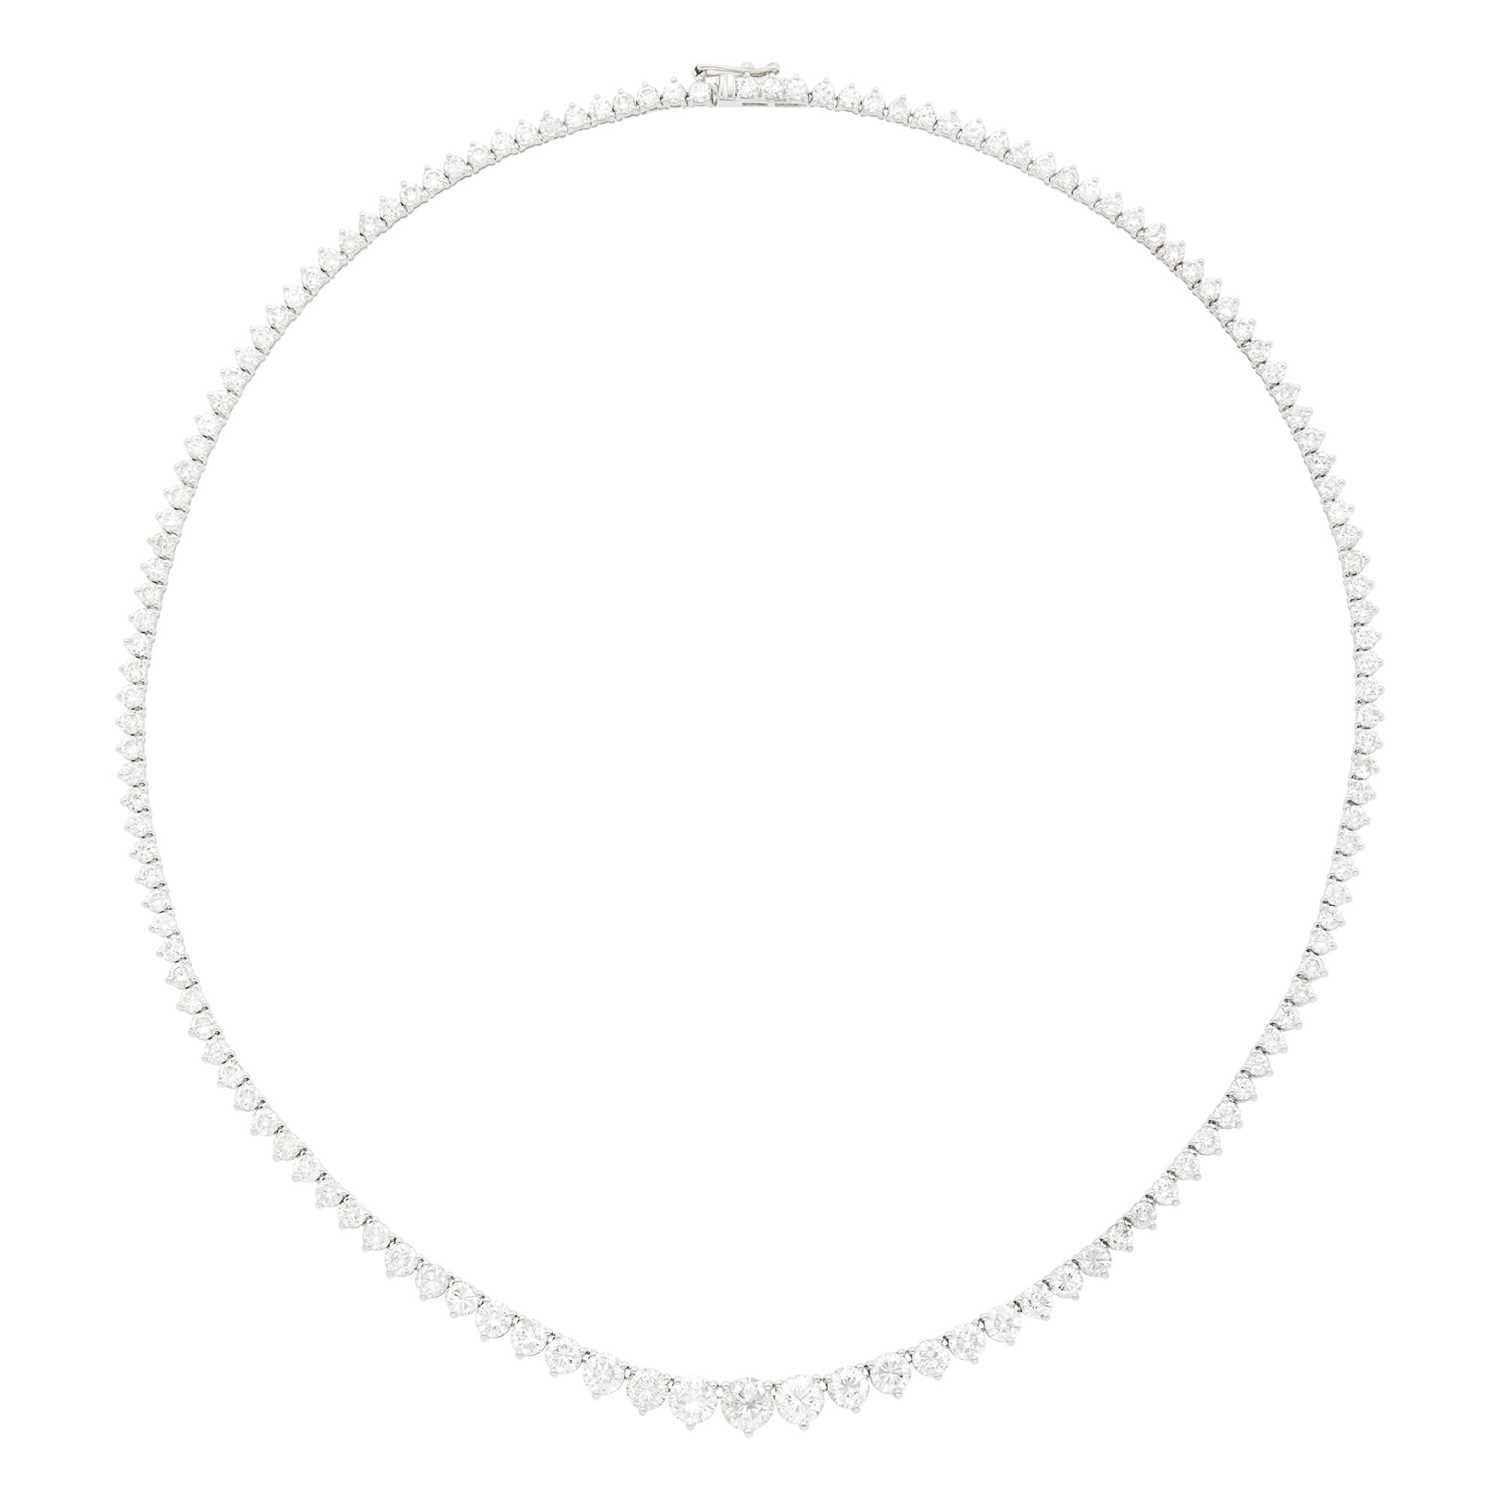 Lot 143 - White Gold and Diamond Necklace